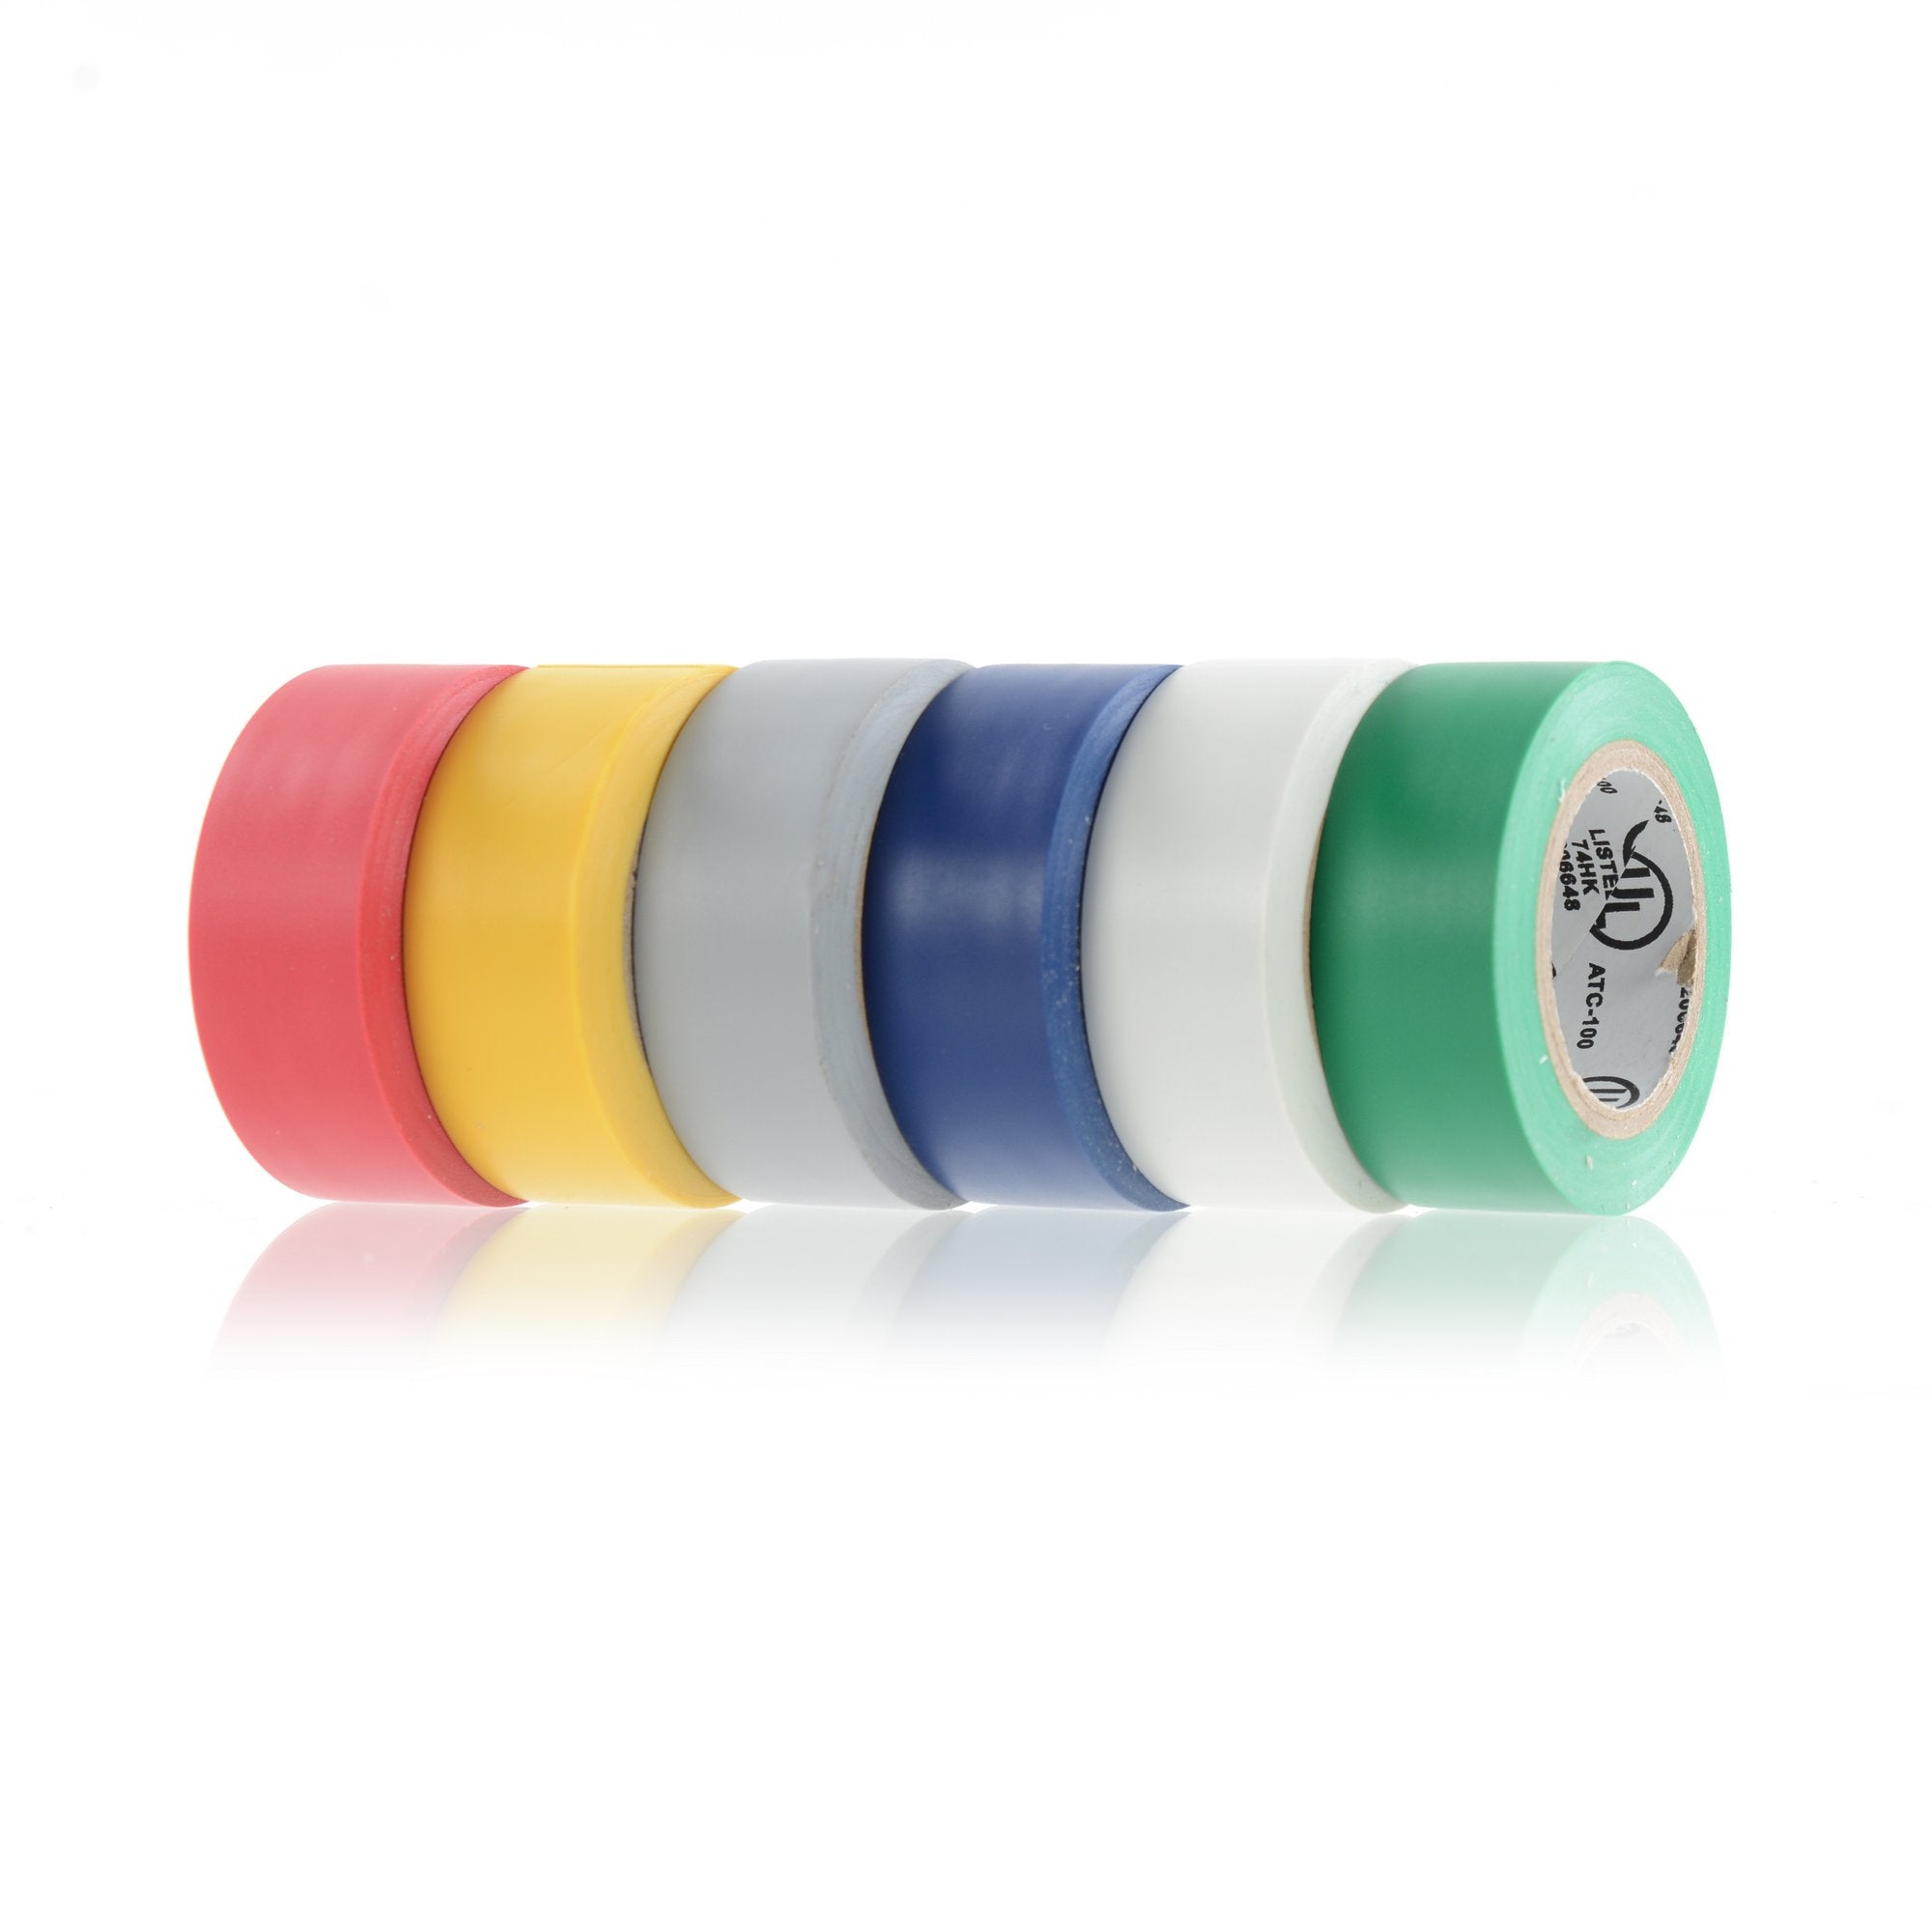 Electrical Tape in 6 Assorted Colors New